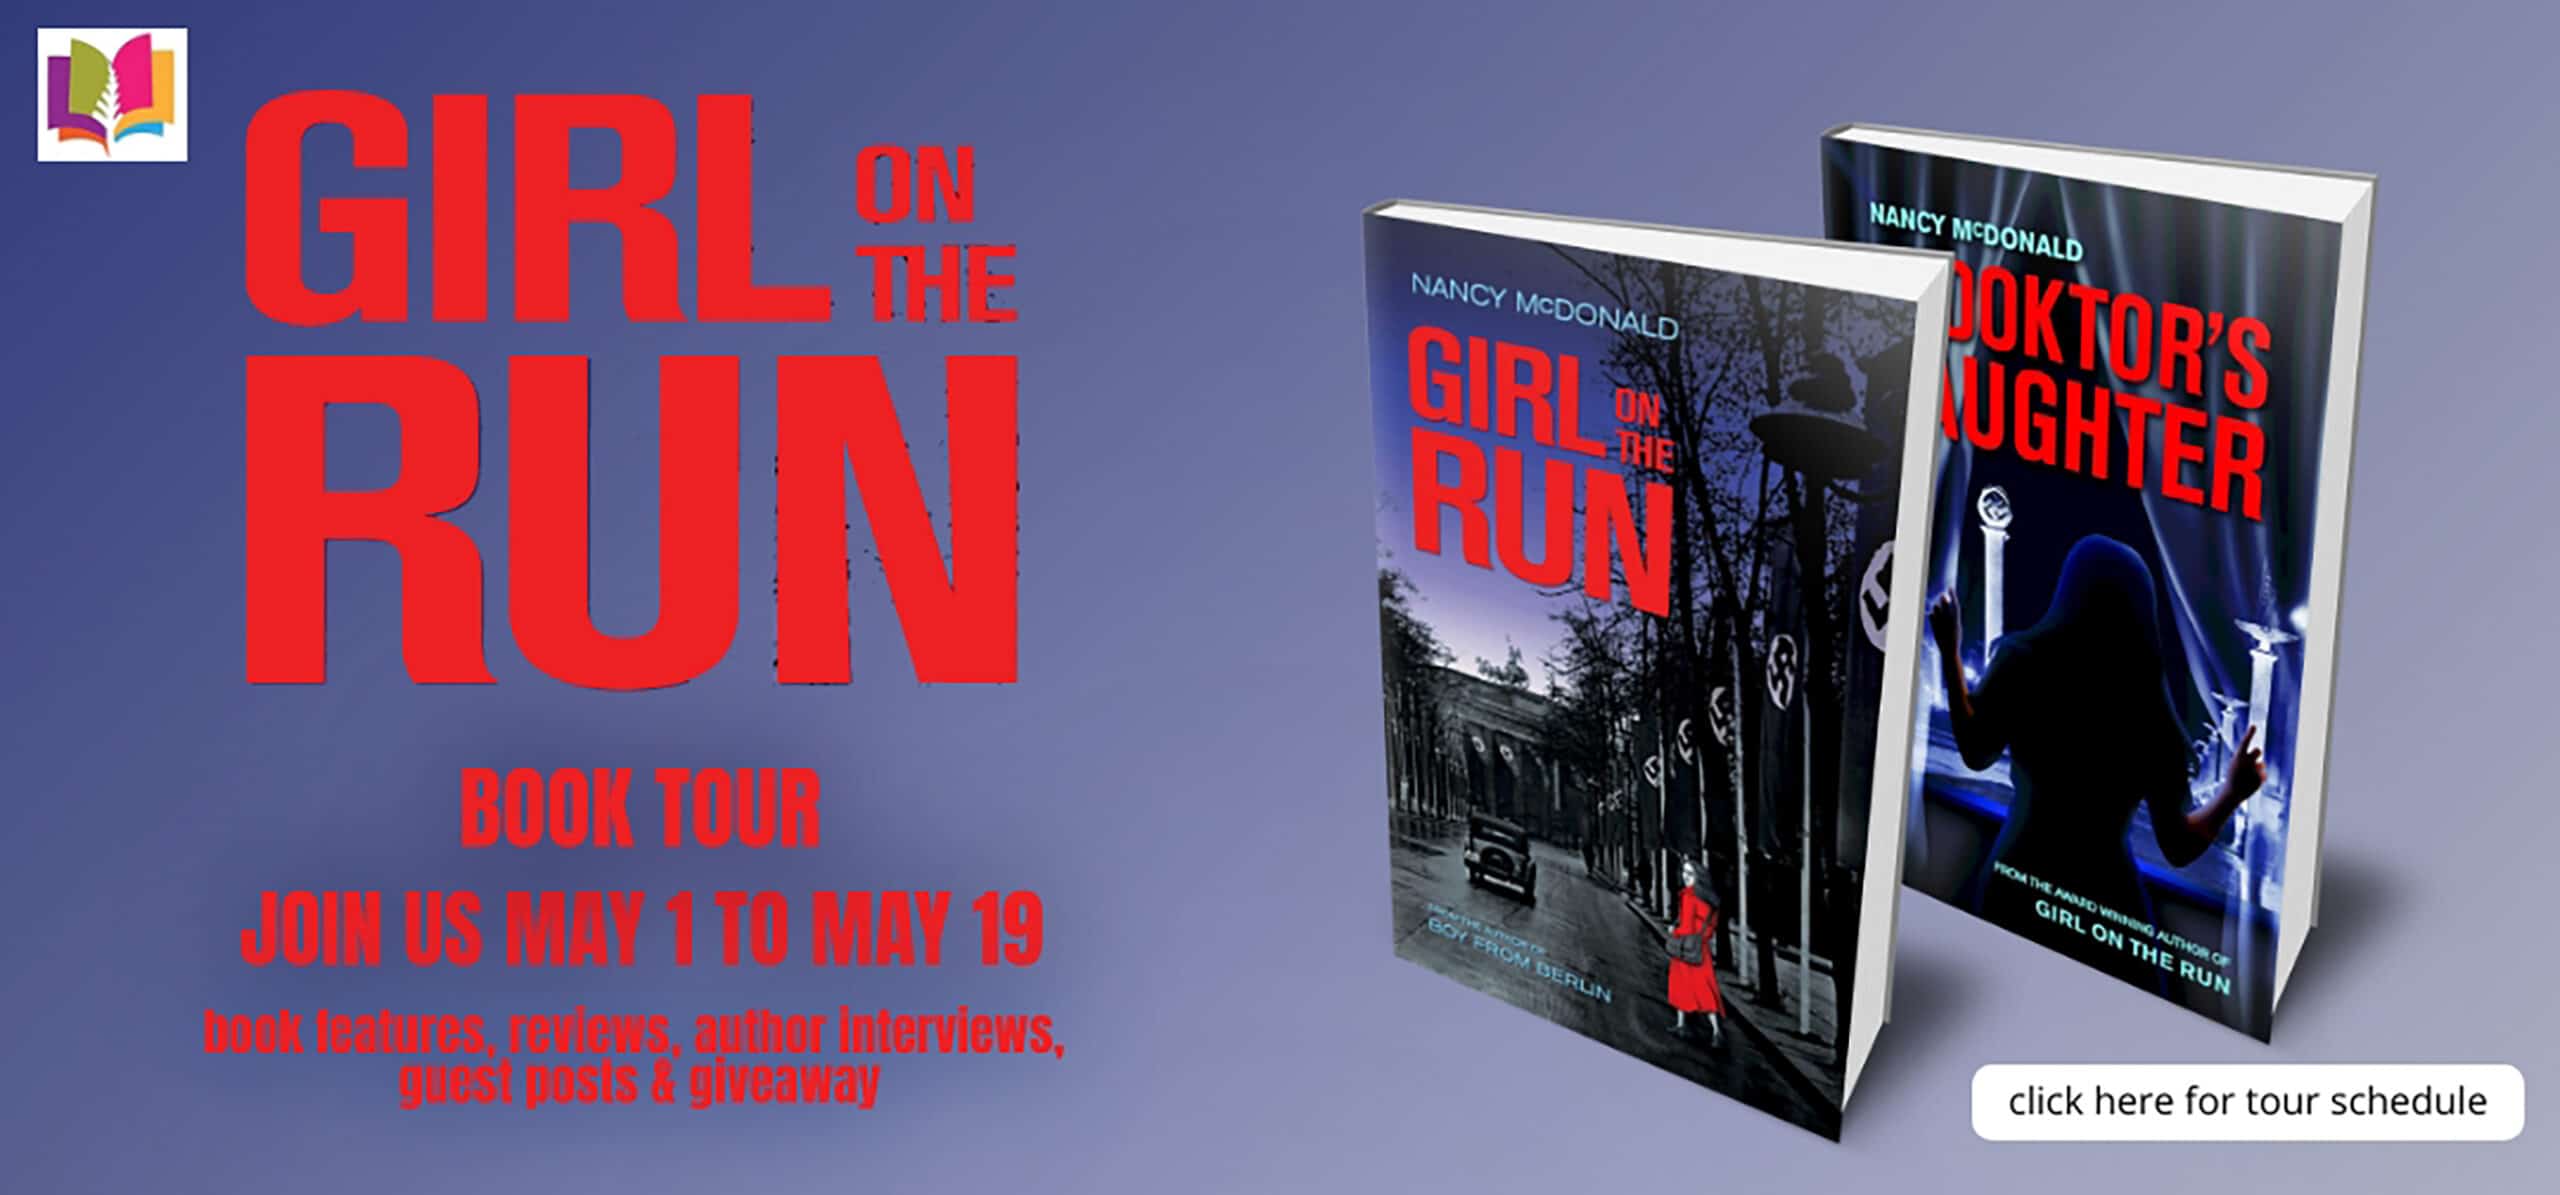 Series Spotlight: Girl on the Run Book 1 and The Doktor's Daughter Book 2 by Nancy McDonald ~ Author Guest Post | Gripping Middle-Grade Historical Fiction